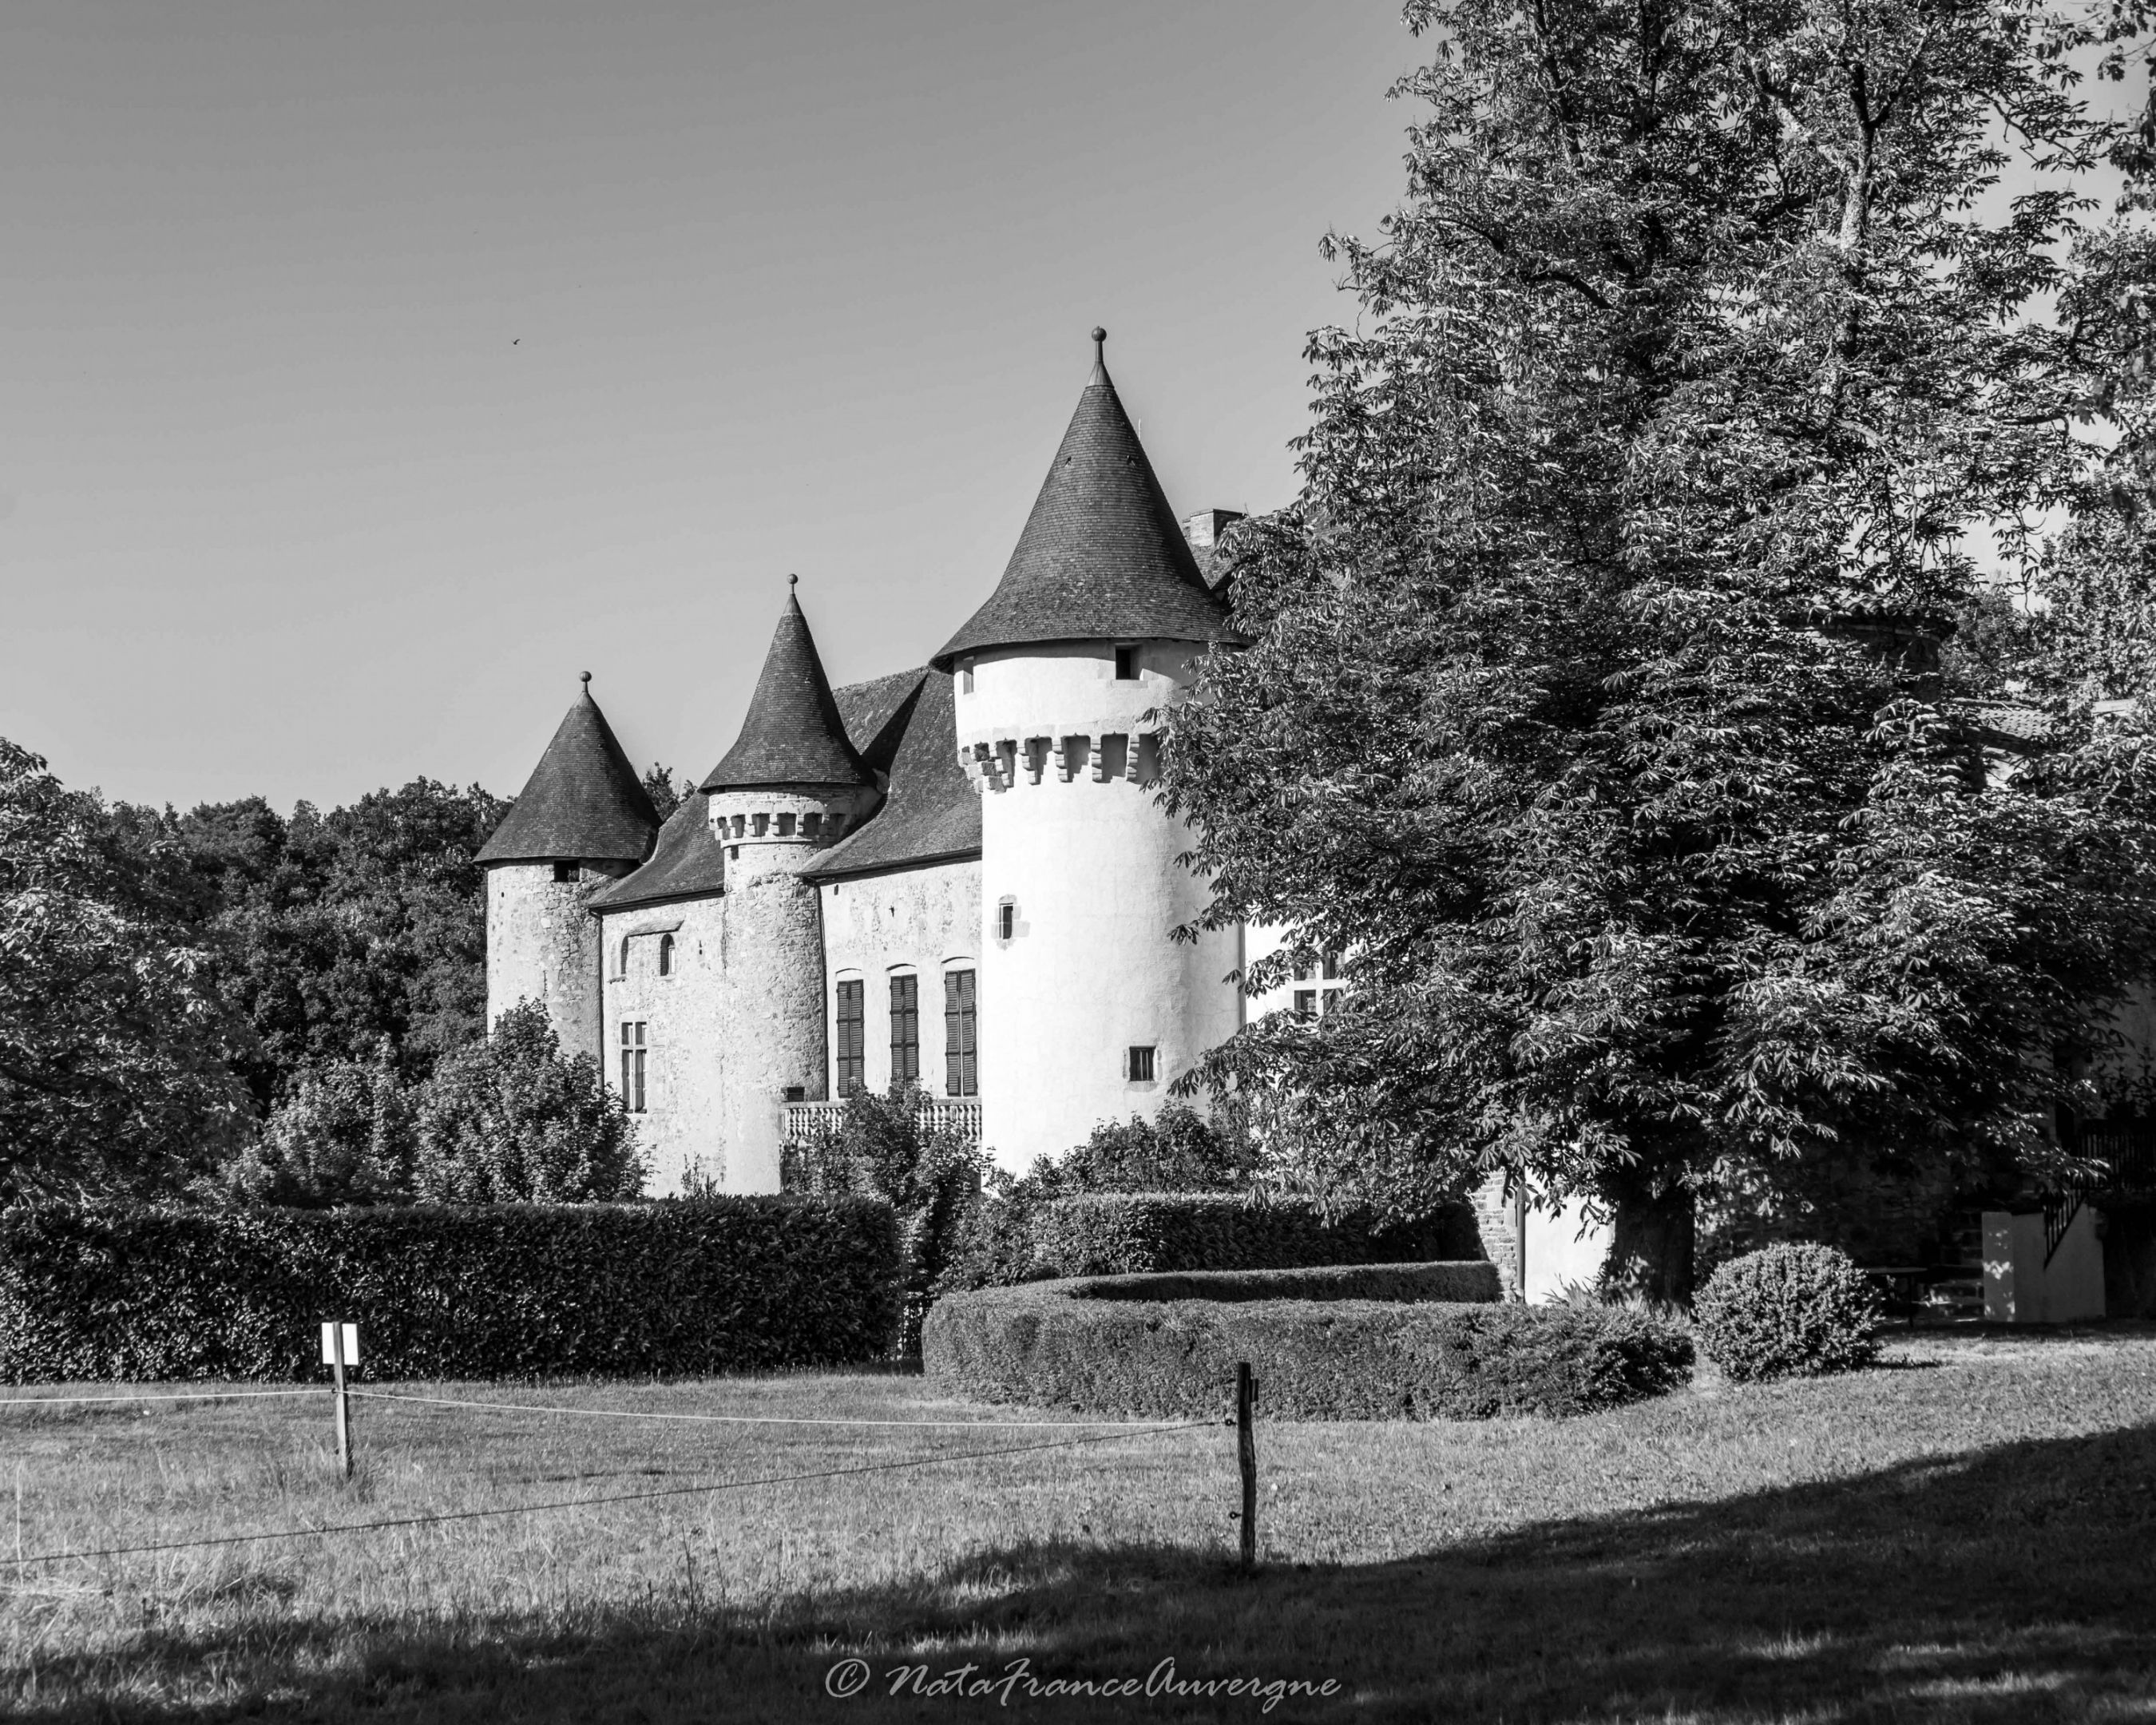 Chateau d'Aulteribe by @NataFranceAuvergne-14